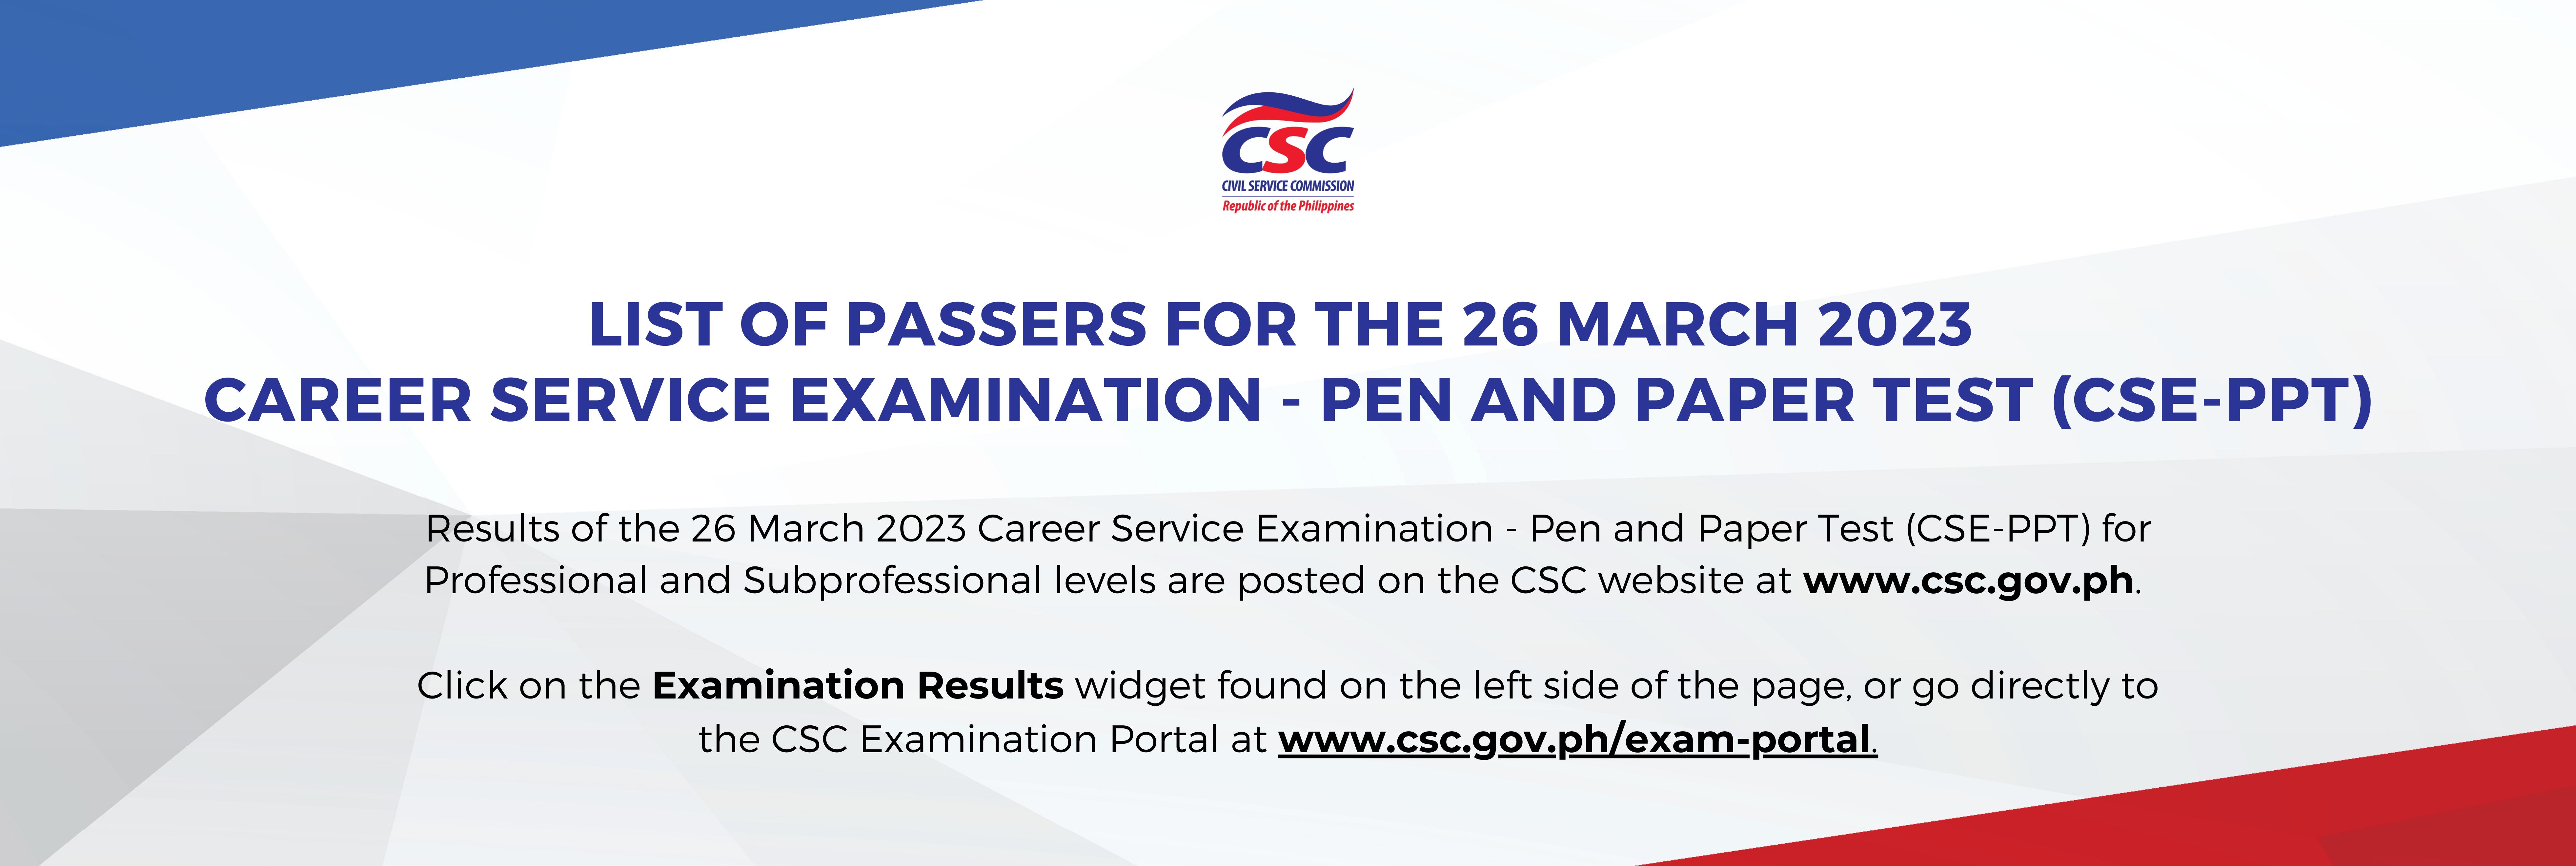 26 March 2023 CSE-PPT passers